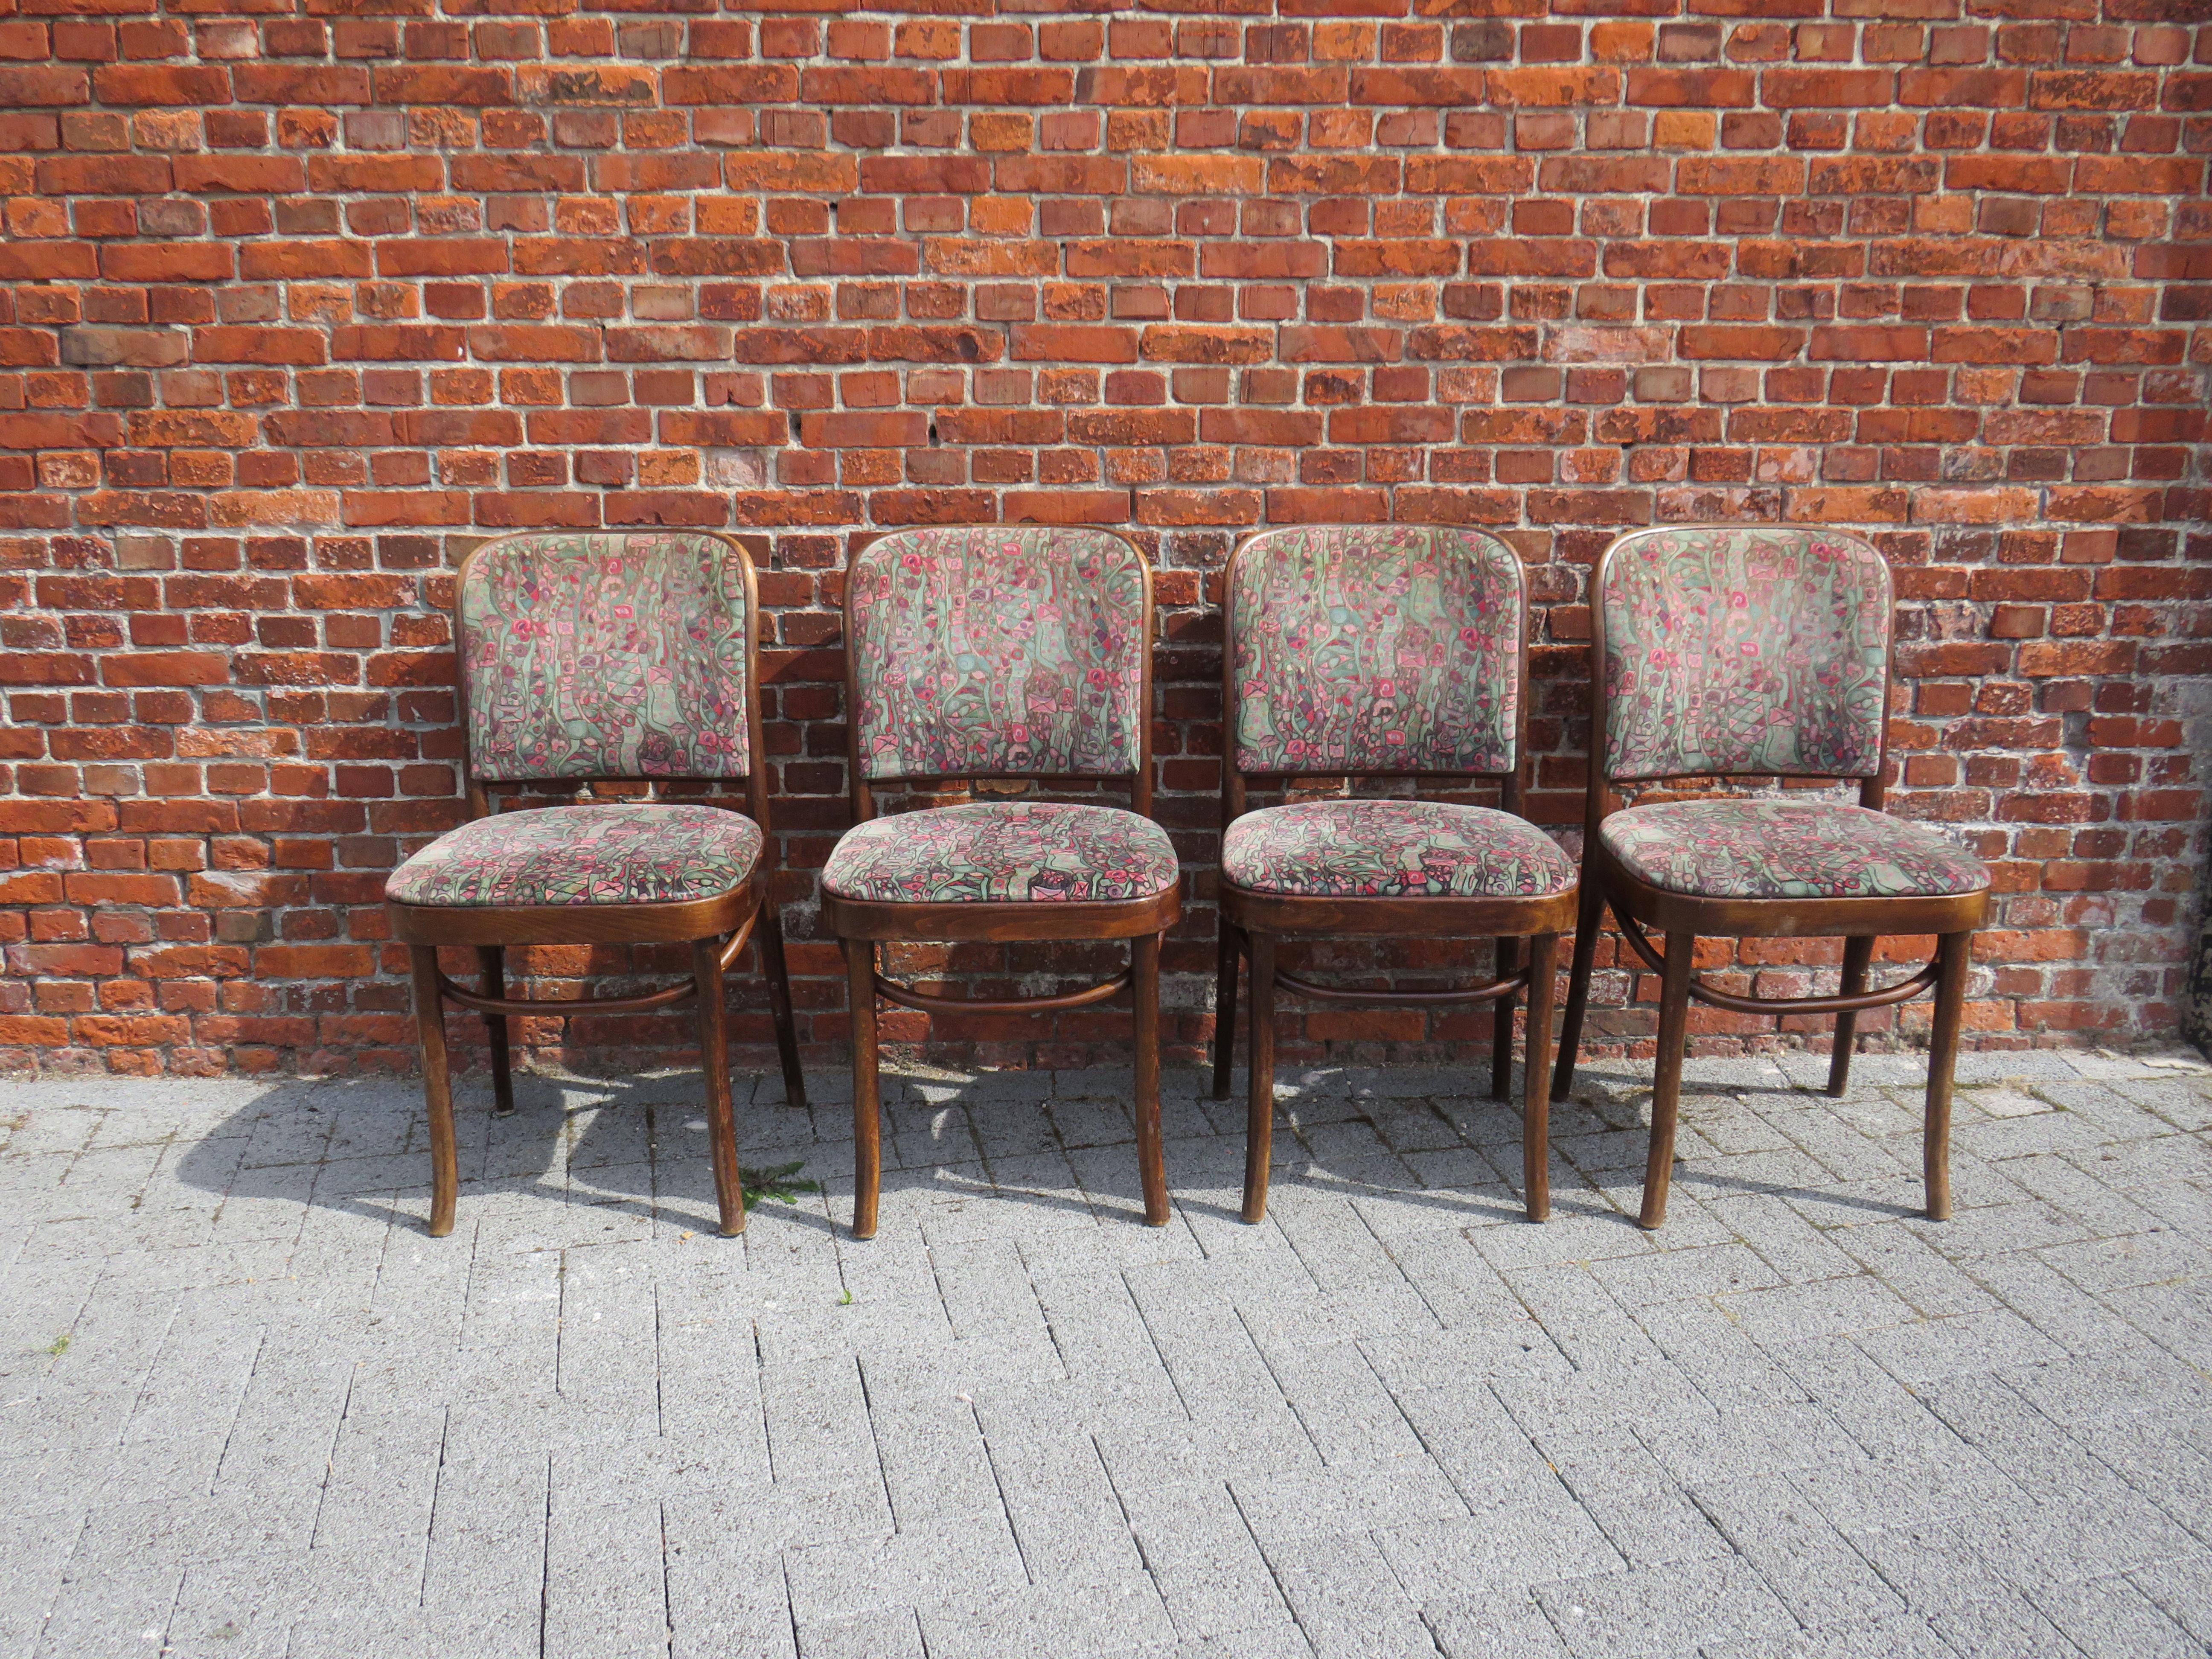 The chairs were designed by Josef Hoffmann for Thonet around 1920 and executed by FMG - Fabryka Mebli Gietych - in Poland in the first half of the 20th century. They have been reupholstered over the years, presumably between 1970 and 1980.
The